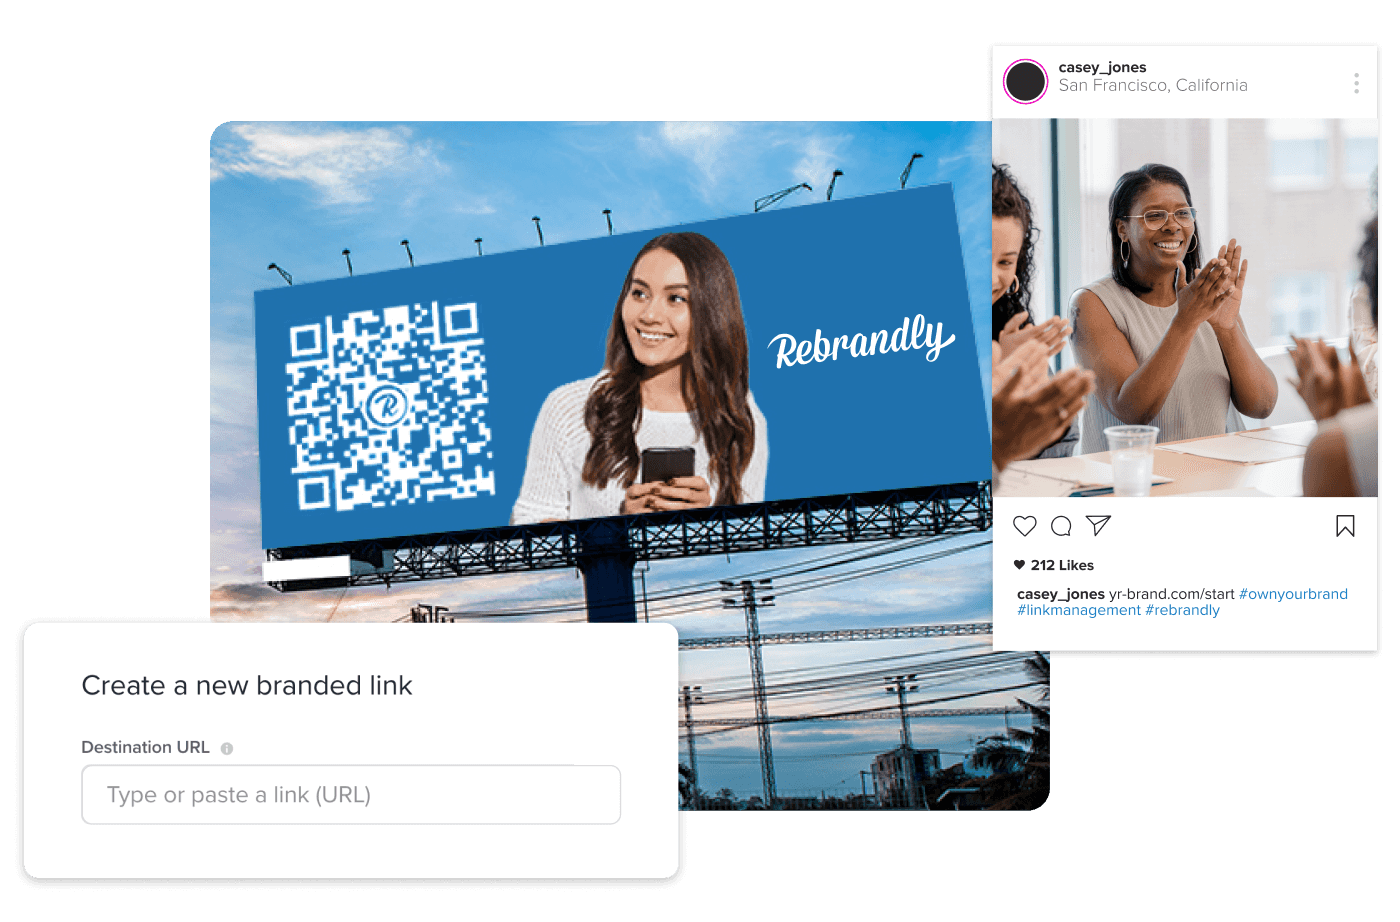 A billboard showing the Rebrandly QR code and a woman smiling alongside the Rebrandly logo and two overlaid photos with one showing the Rebrandly destination link editor and another showing an Instagram post of a woman smiling and clapping at a desk alongside other women.